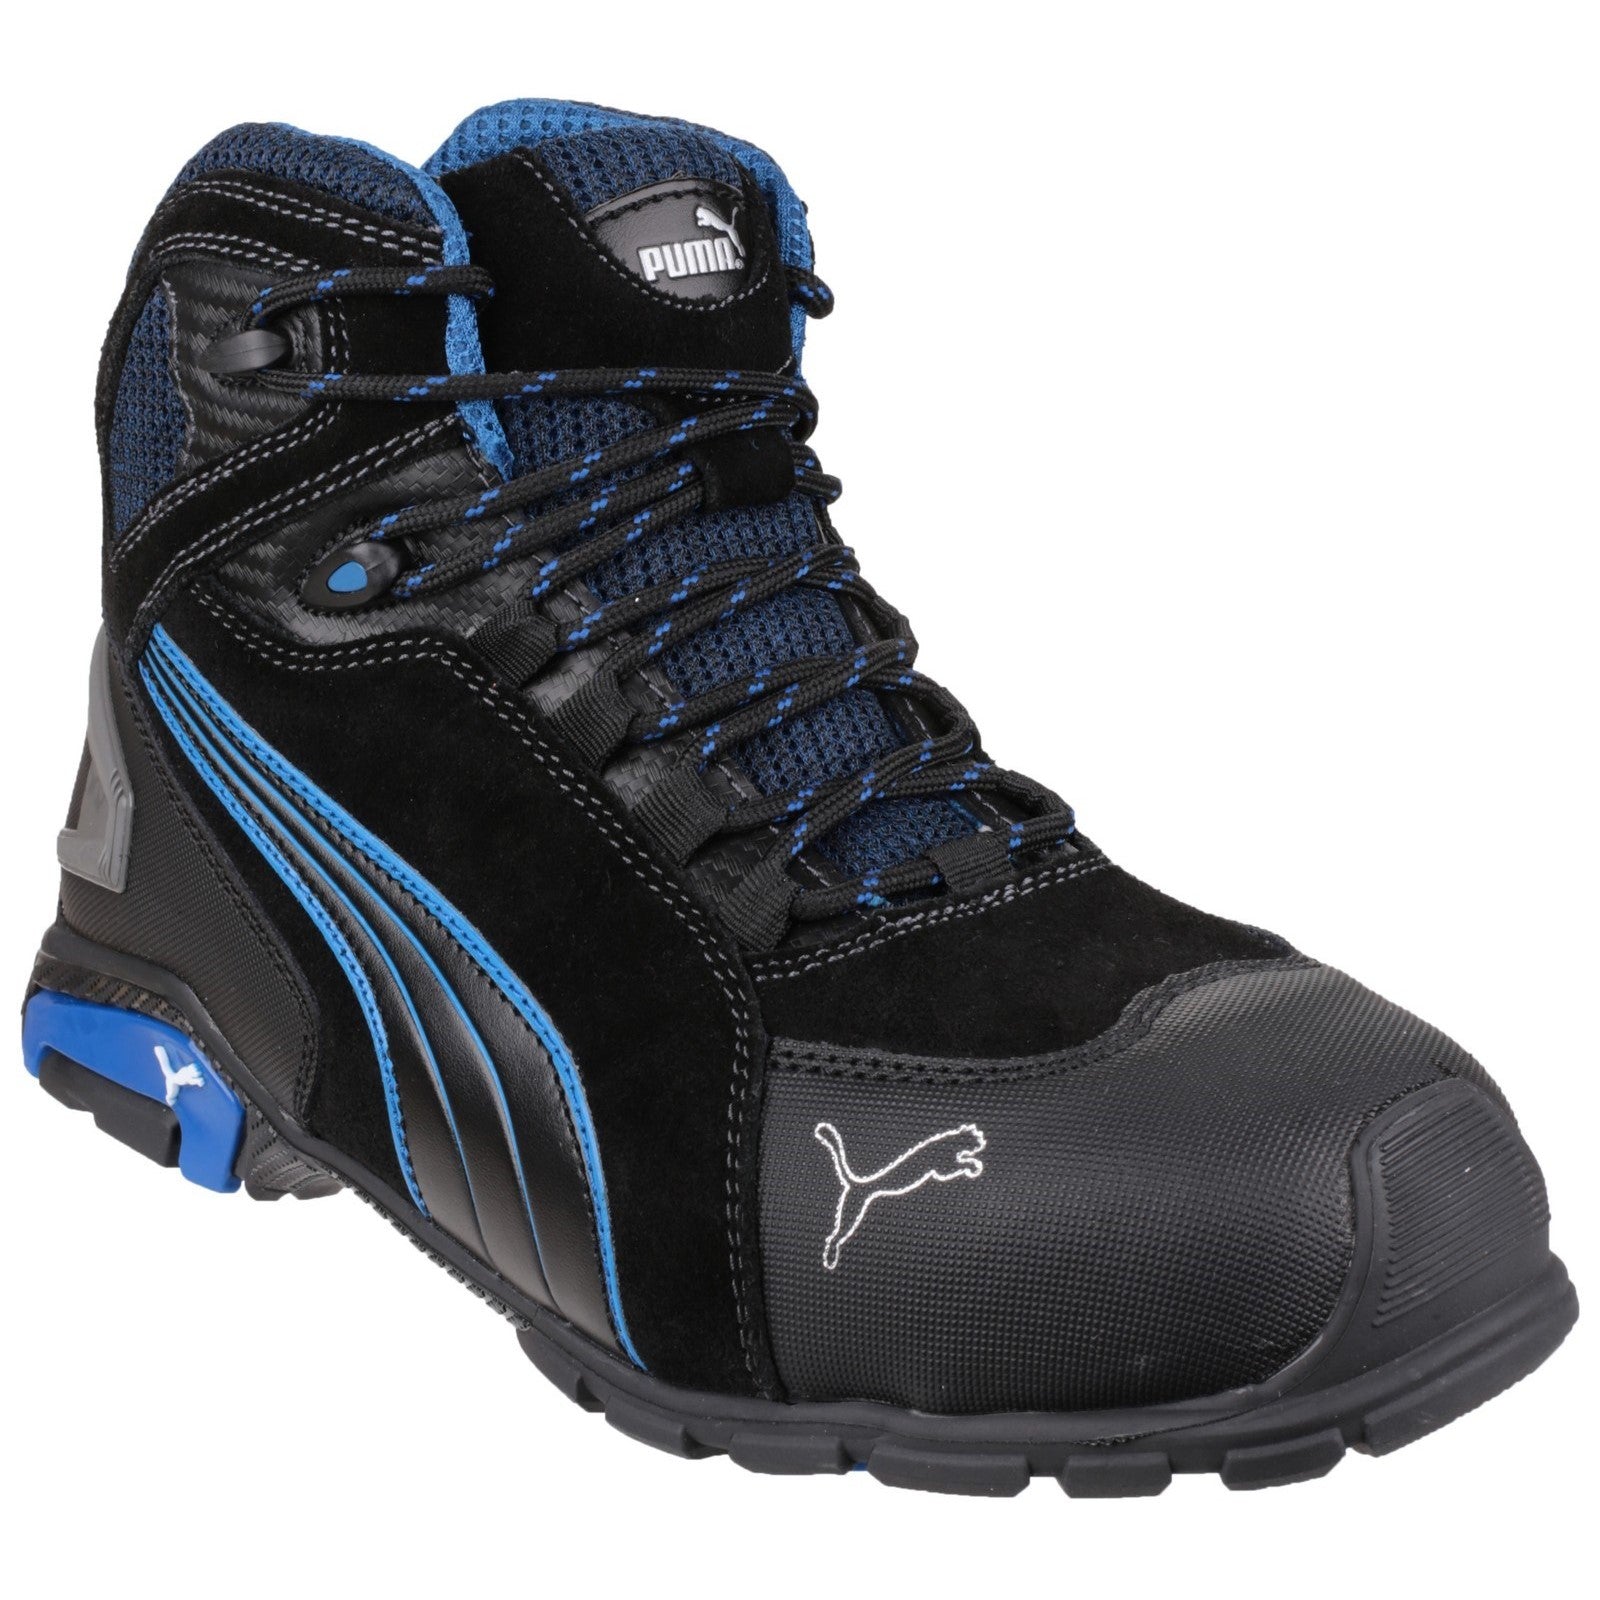 Rio Mid Lace-up Safety Boot, Puma Safety